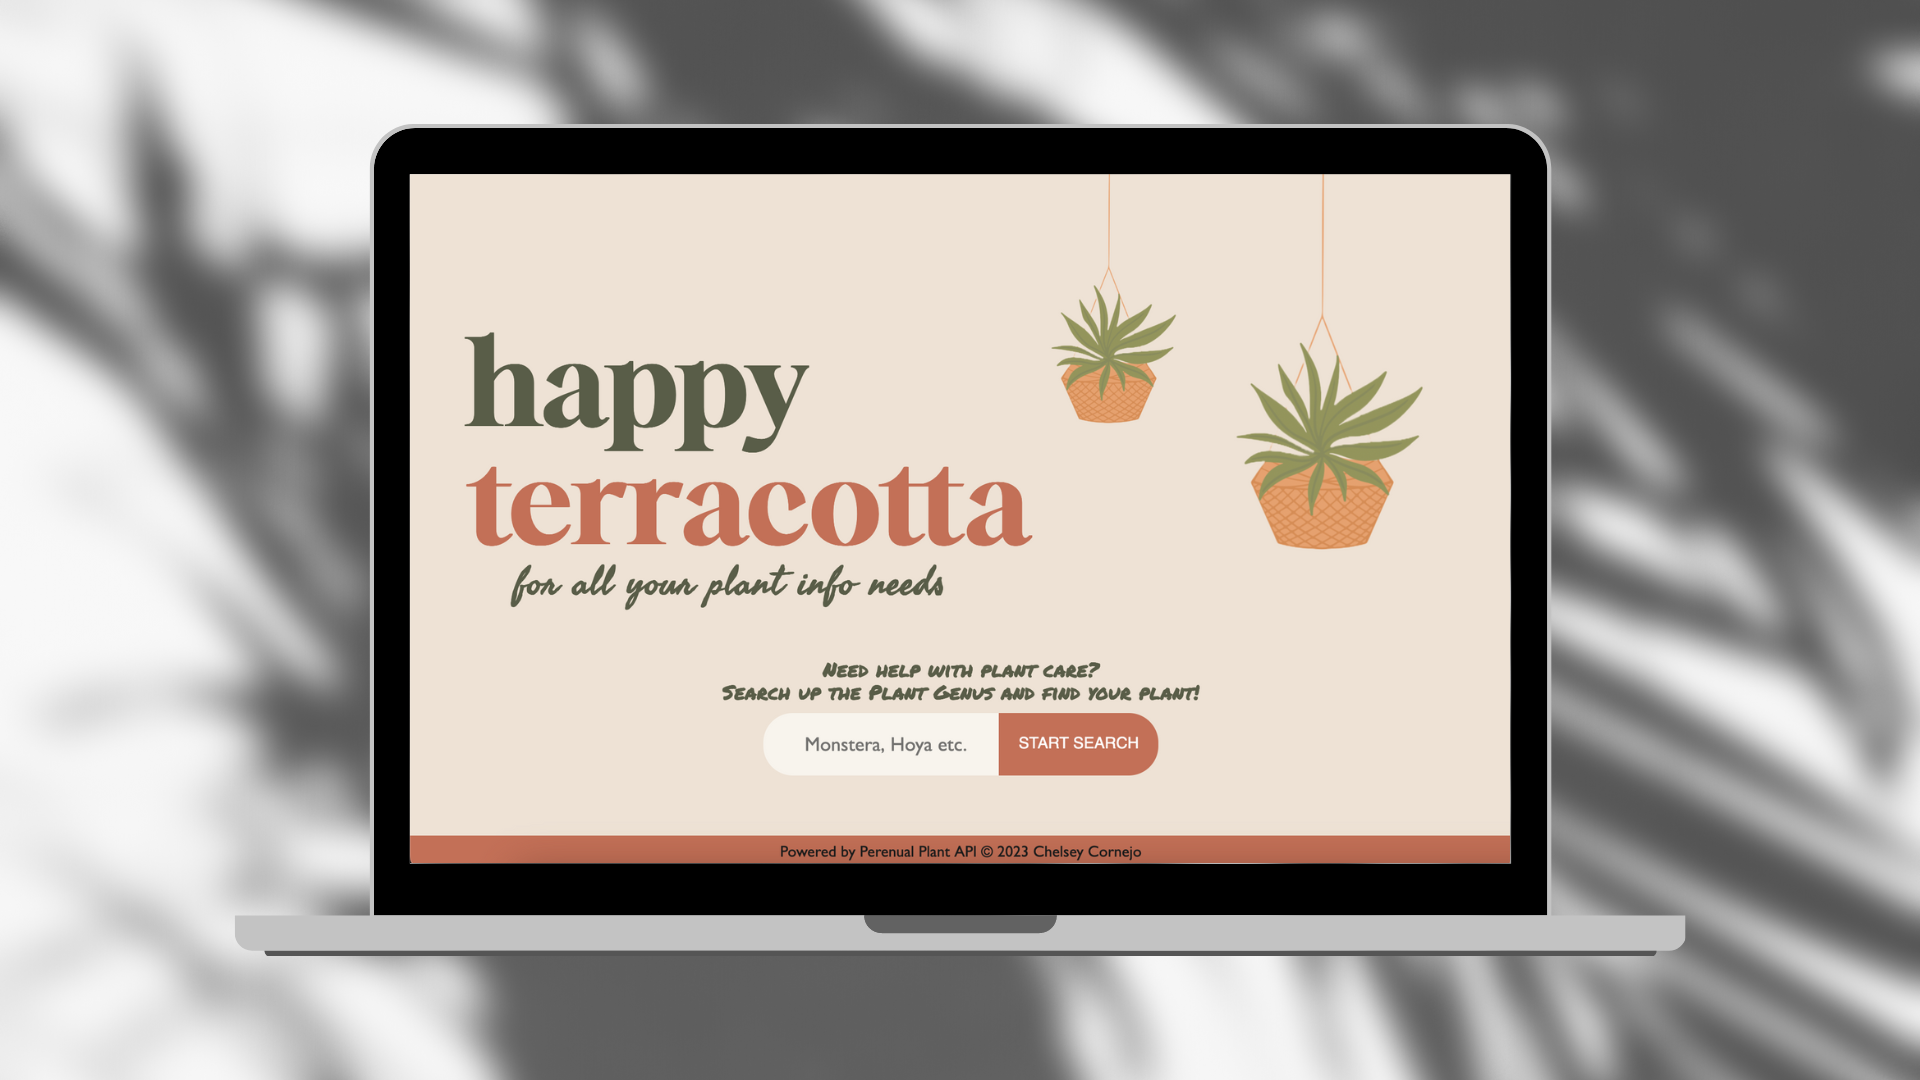 macbook with Happy Terracotta plant info sideNavItem on screen and blurred background